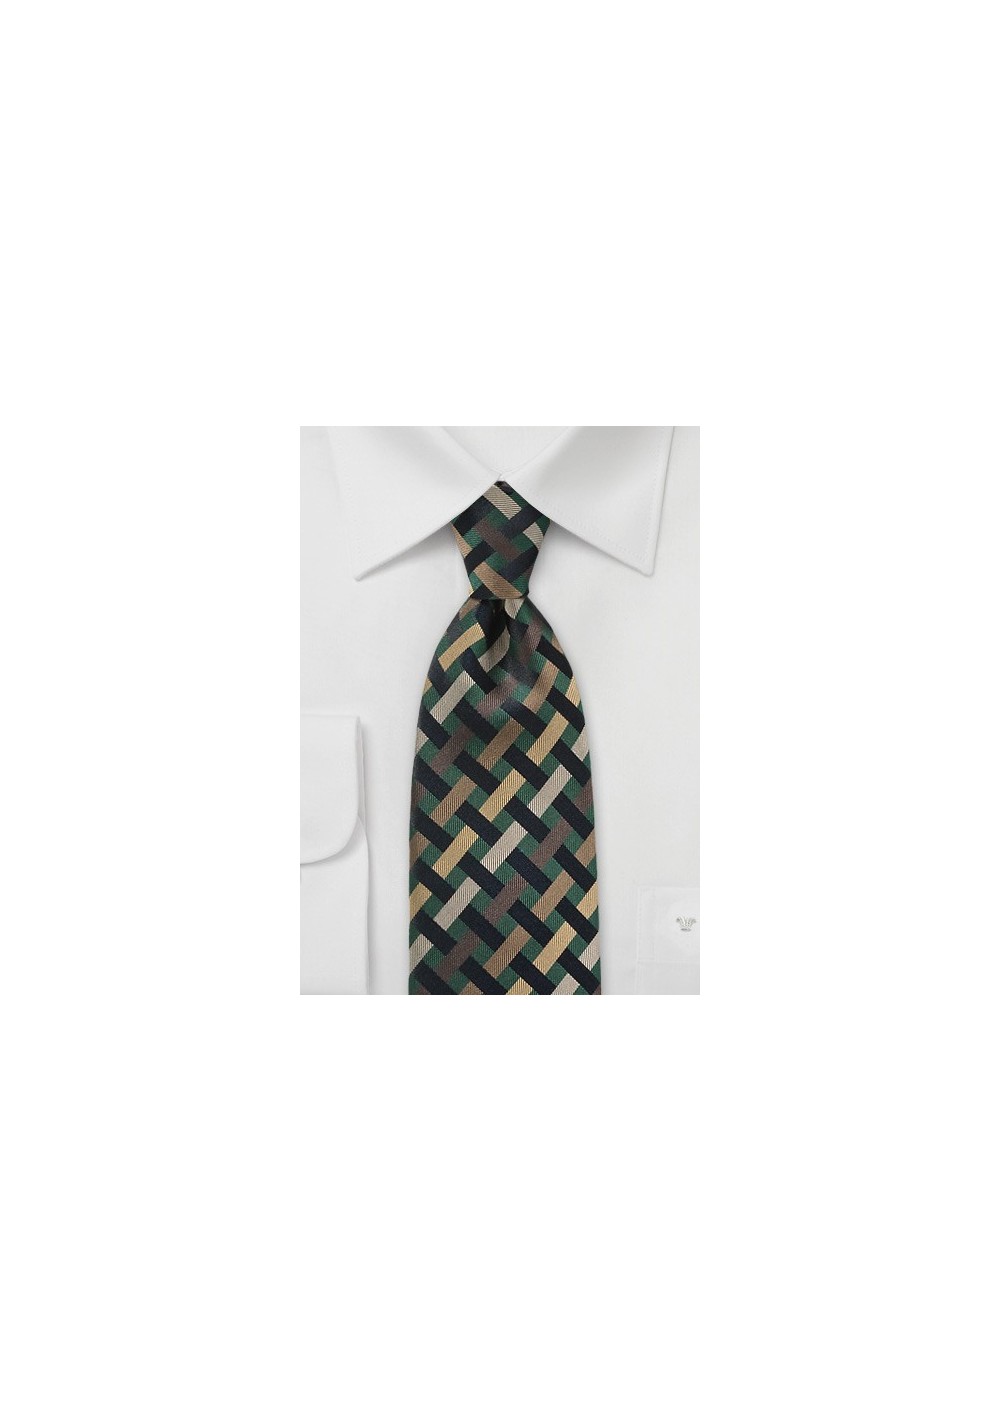 Art Deco Tie in Greens and Golds